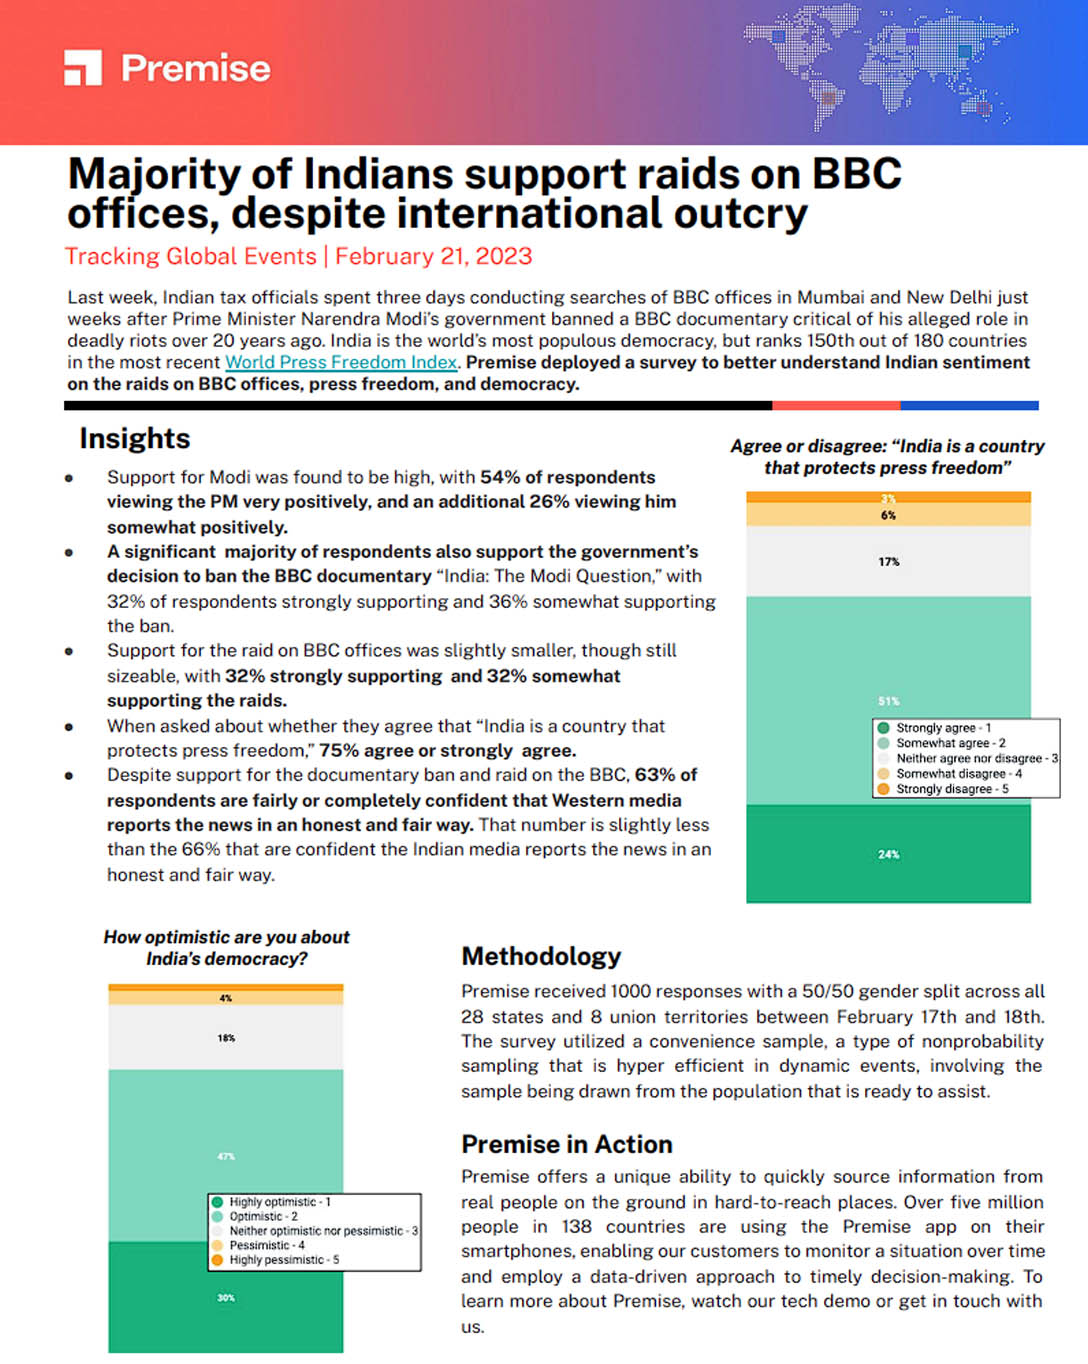 Majority of Indians support raids on BBC offices, despite international outcry